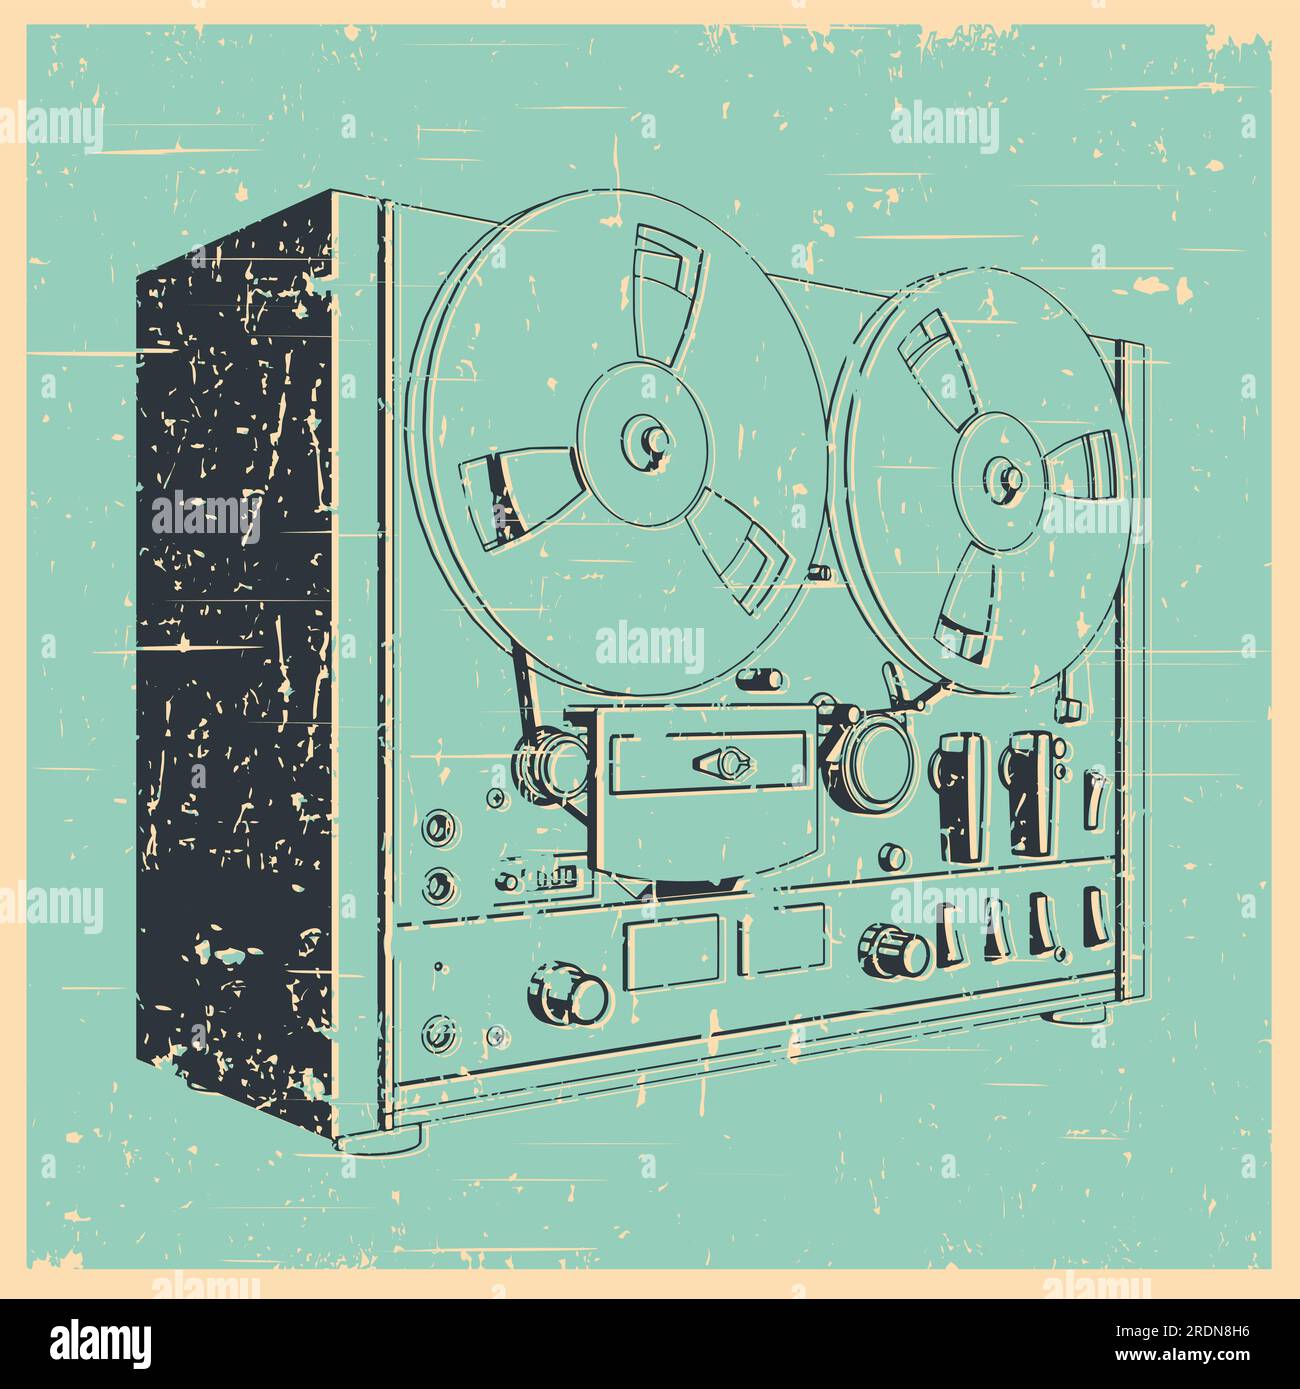 Stylized vector illustration of reel to reel tape recorder retro